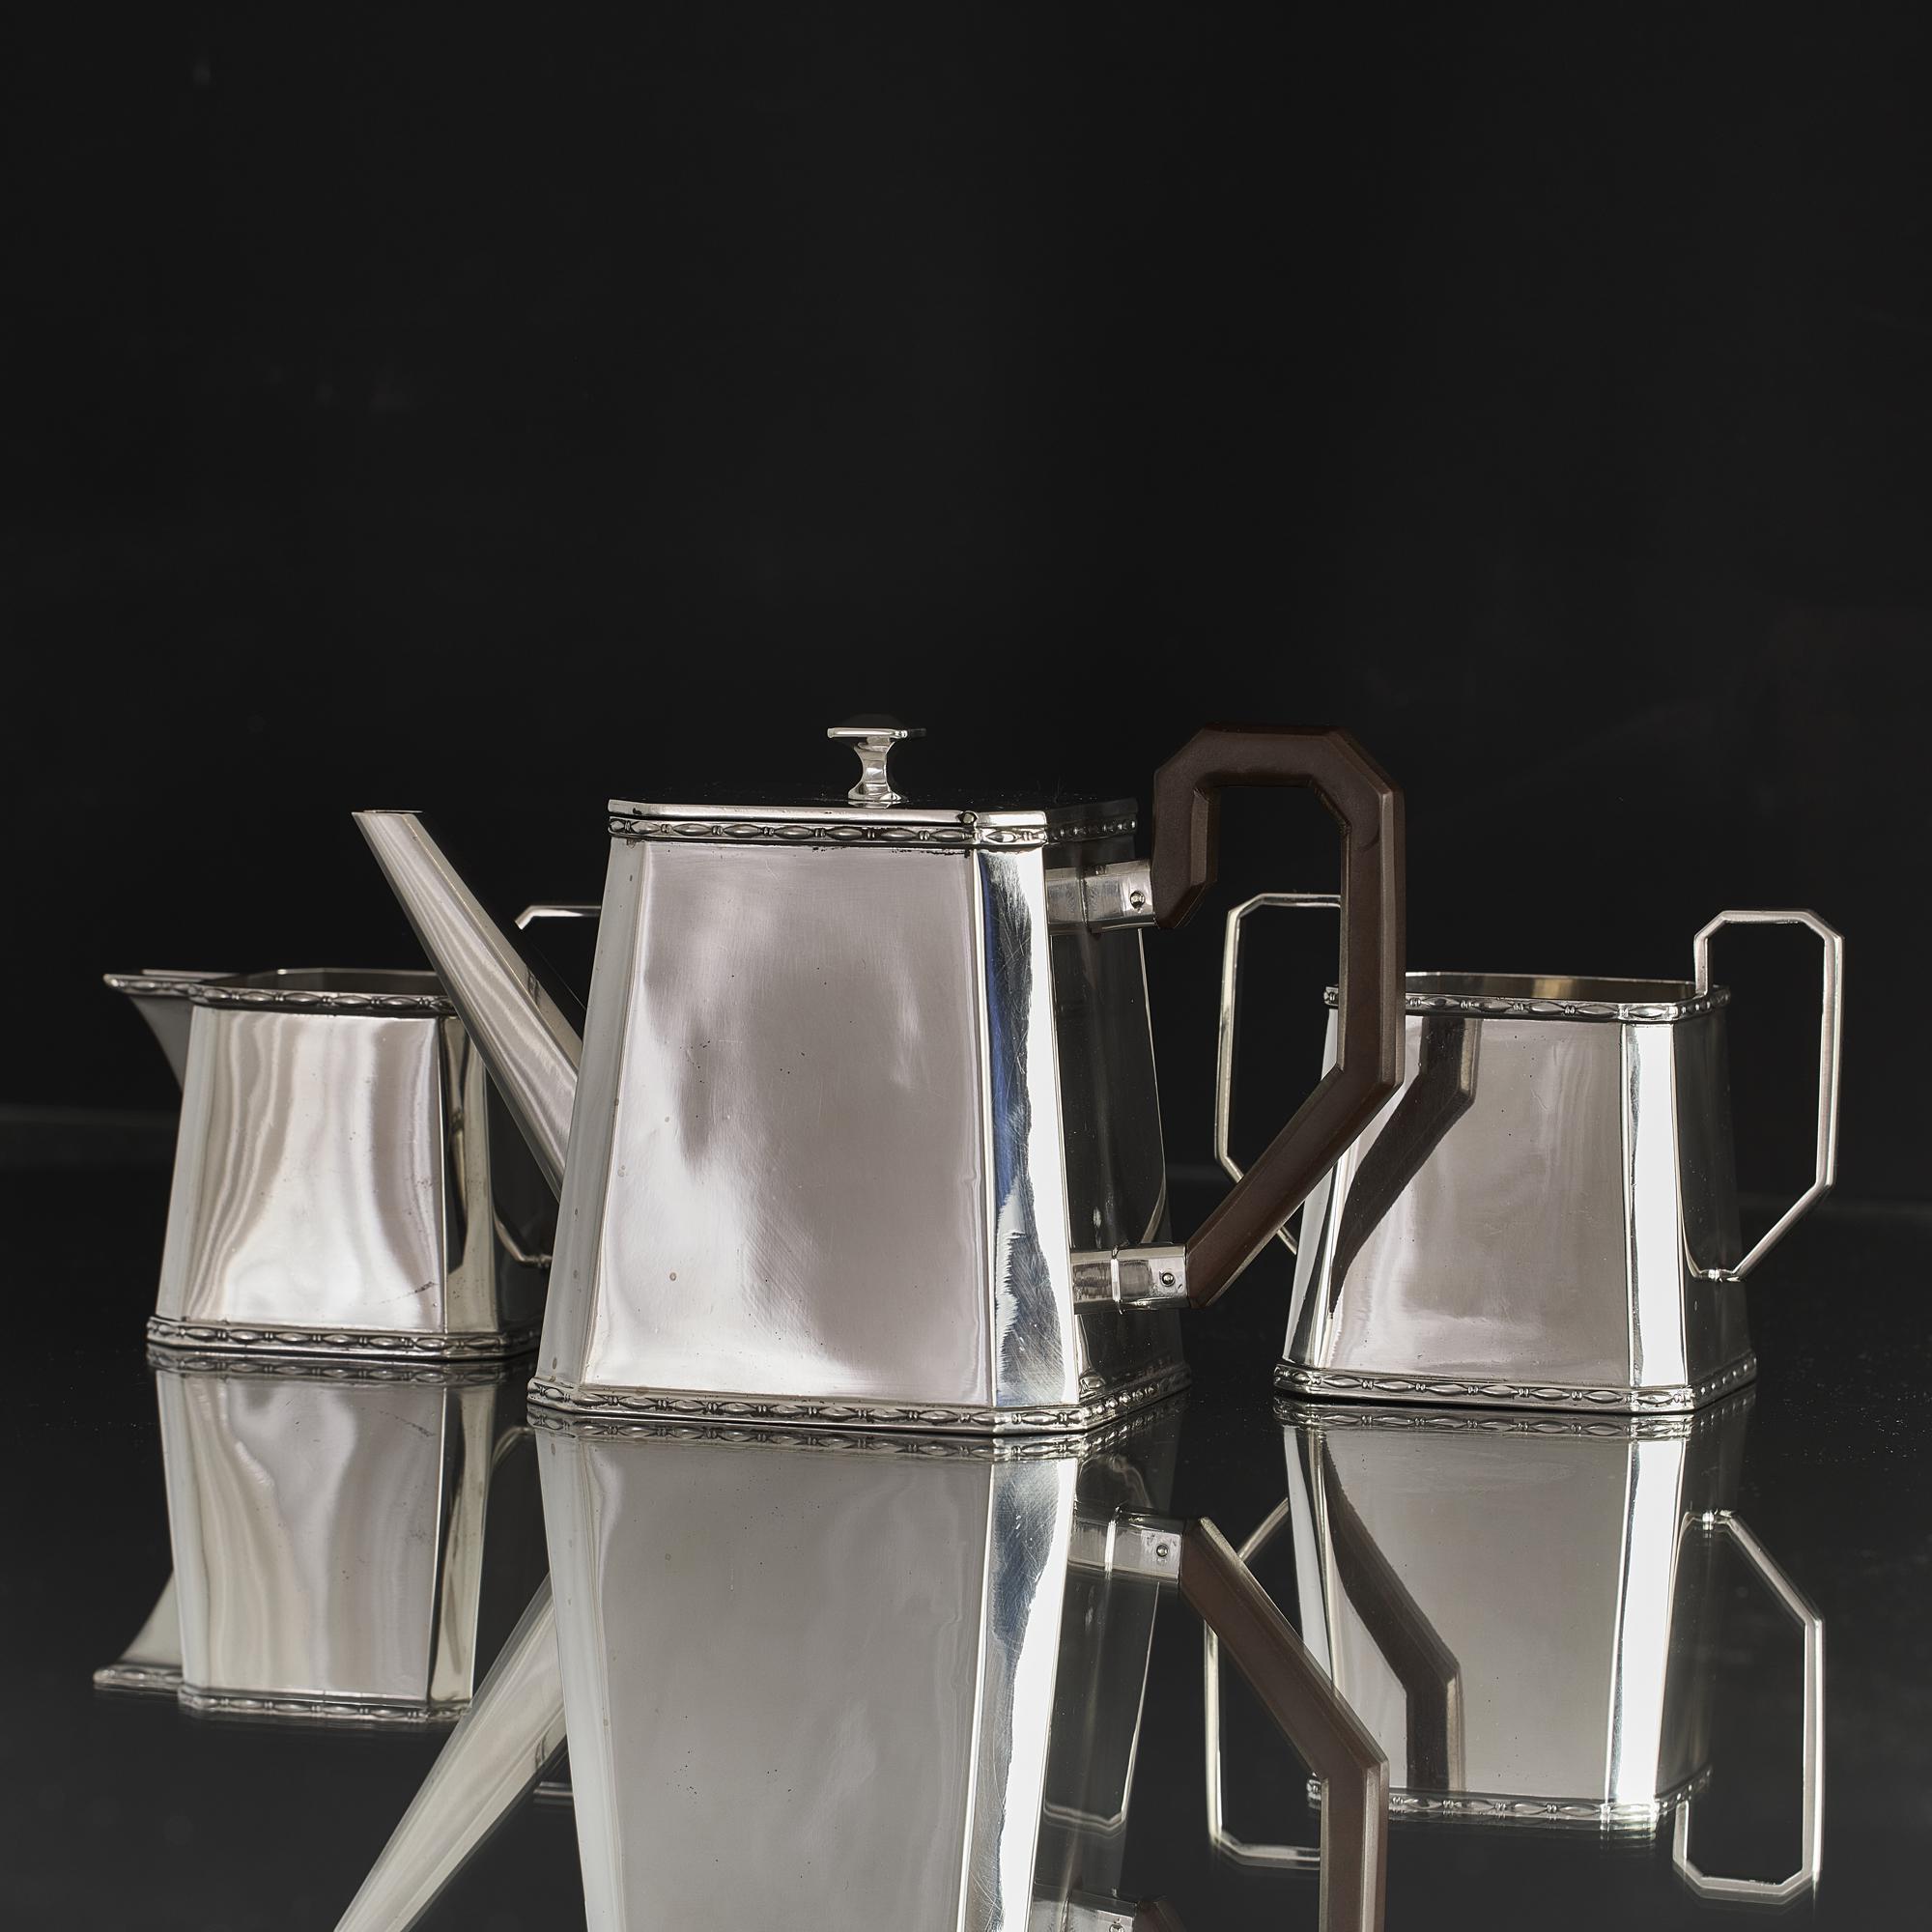 Stylish three-piece Art Deco style silver tea set comprising teapot, milk jug and sugar bowl. The set's trapezoid form and simplicity of style is typical of the Art Deco era with just a discrete ribbon of applied decoration around the top and bottom